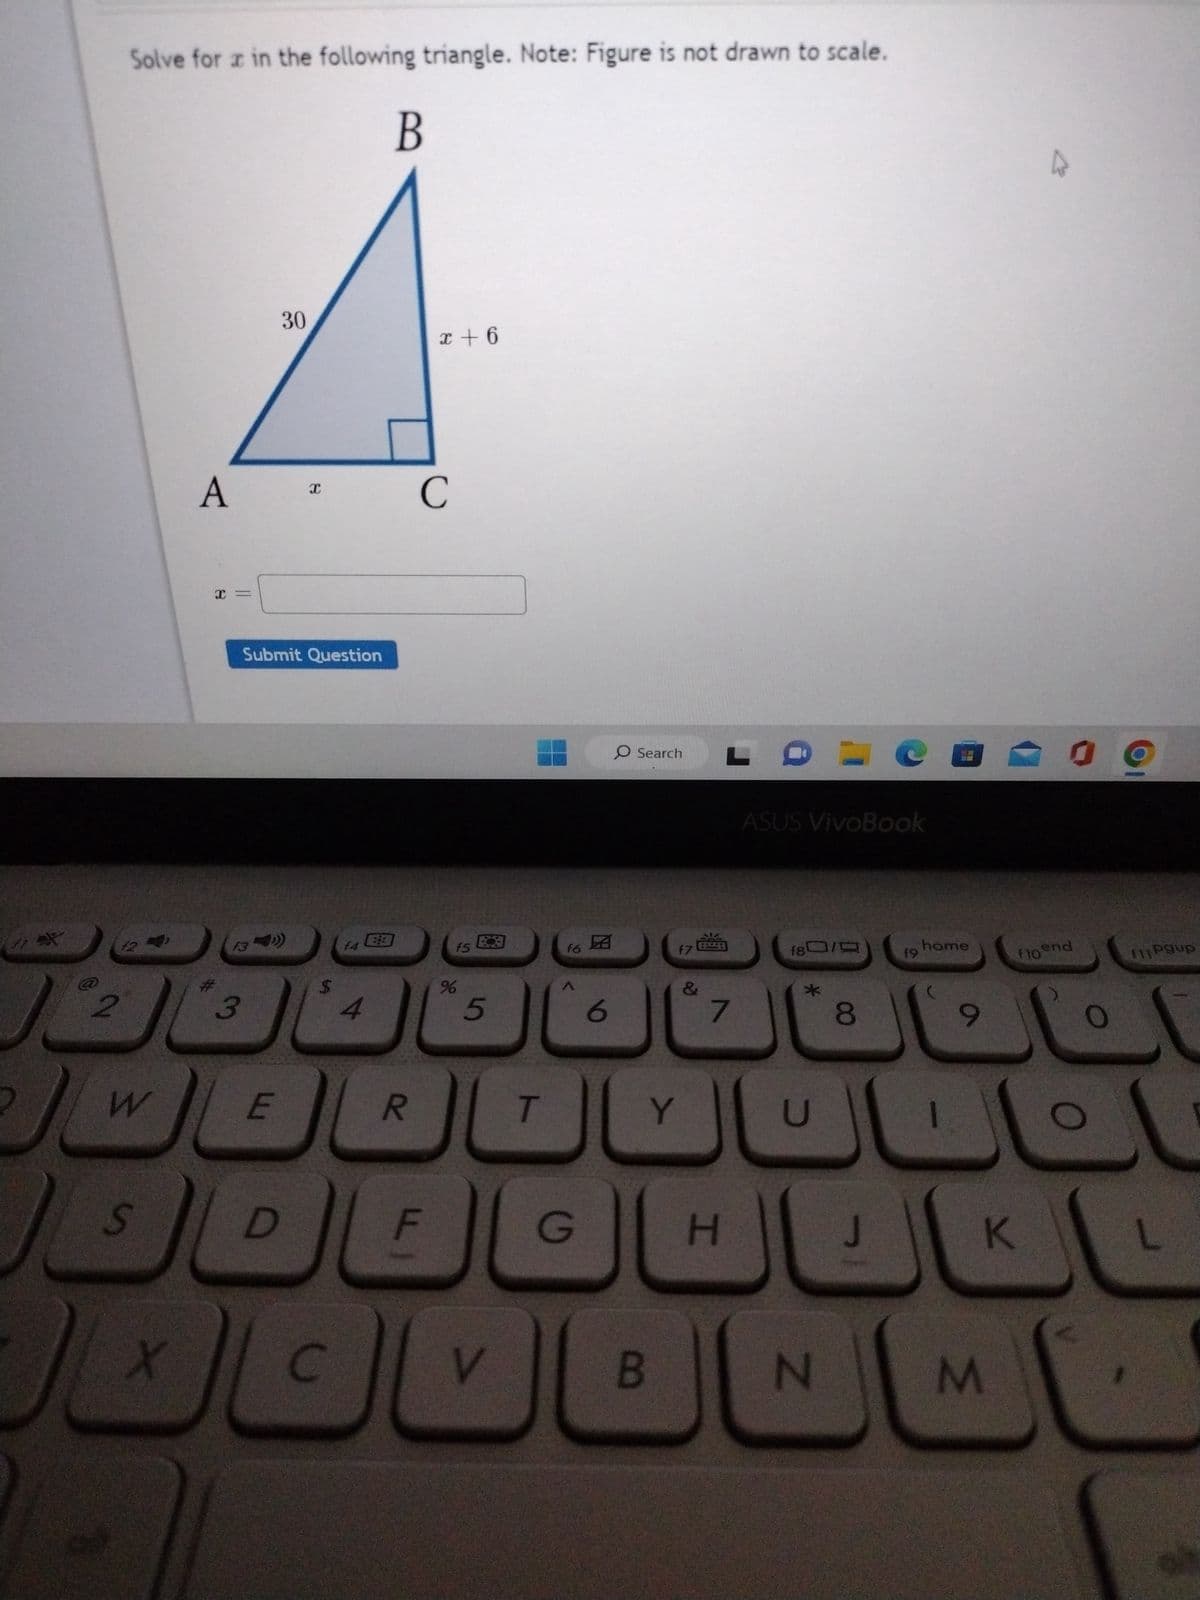 1*X
2
2
Solve for x in the following triangle. Note: Figure is not drawn to scale.
12
W
S
X
A
x =
13
3
Submit Question
E
30
D
X
C
14
4
B
R
x+6
C
F
f5
%
5
V
T
f6
G
6
O Search
f7
Y
B
&
7
H
ASUS VivoBook
f80/
*
U
HOD
N
8
J
19
home
9
K
M
K
09
floend
f11 Pgup
L